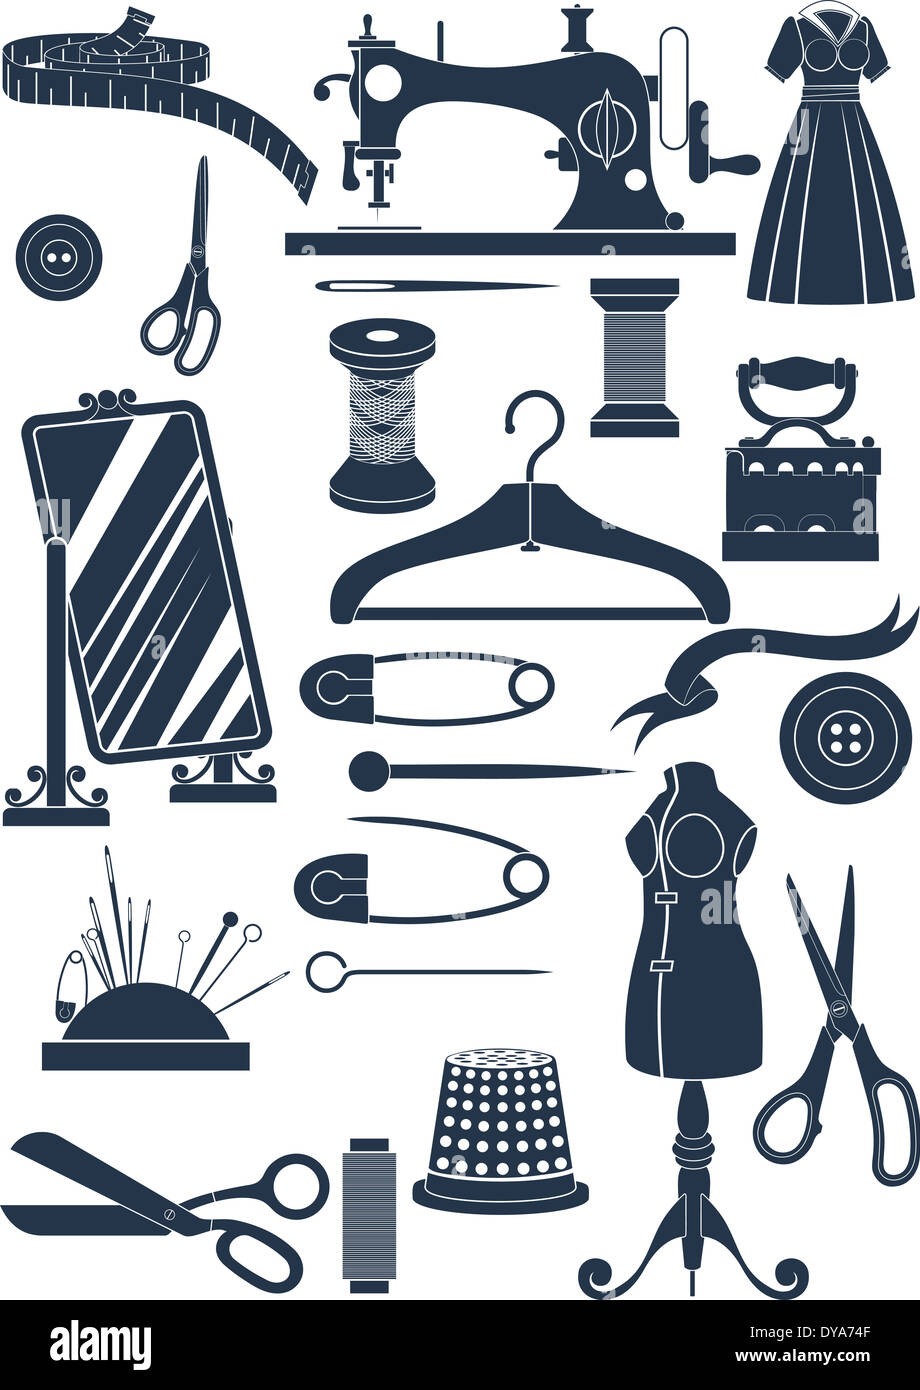 sewing accessories Stock Photo